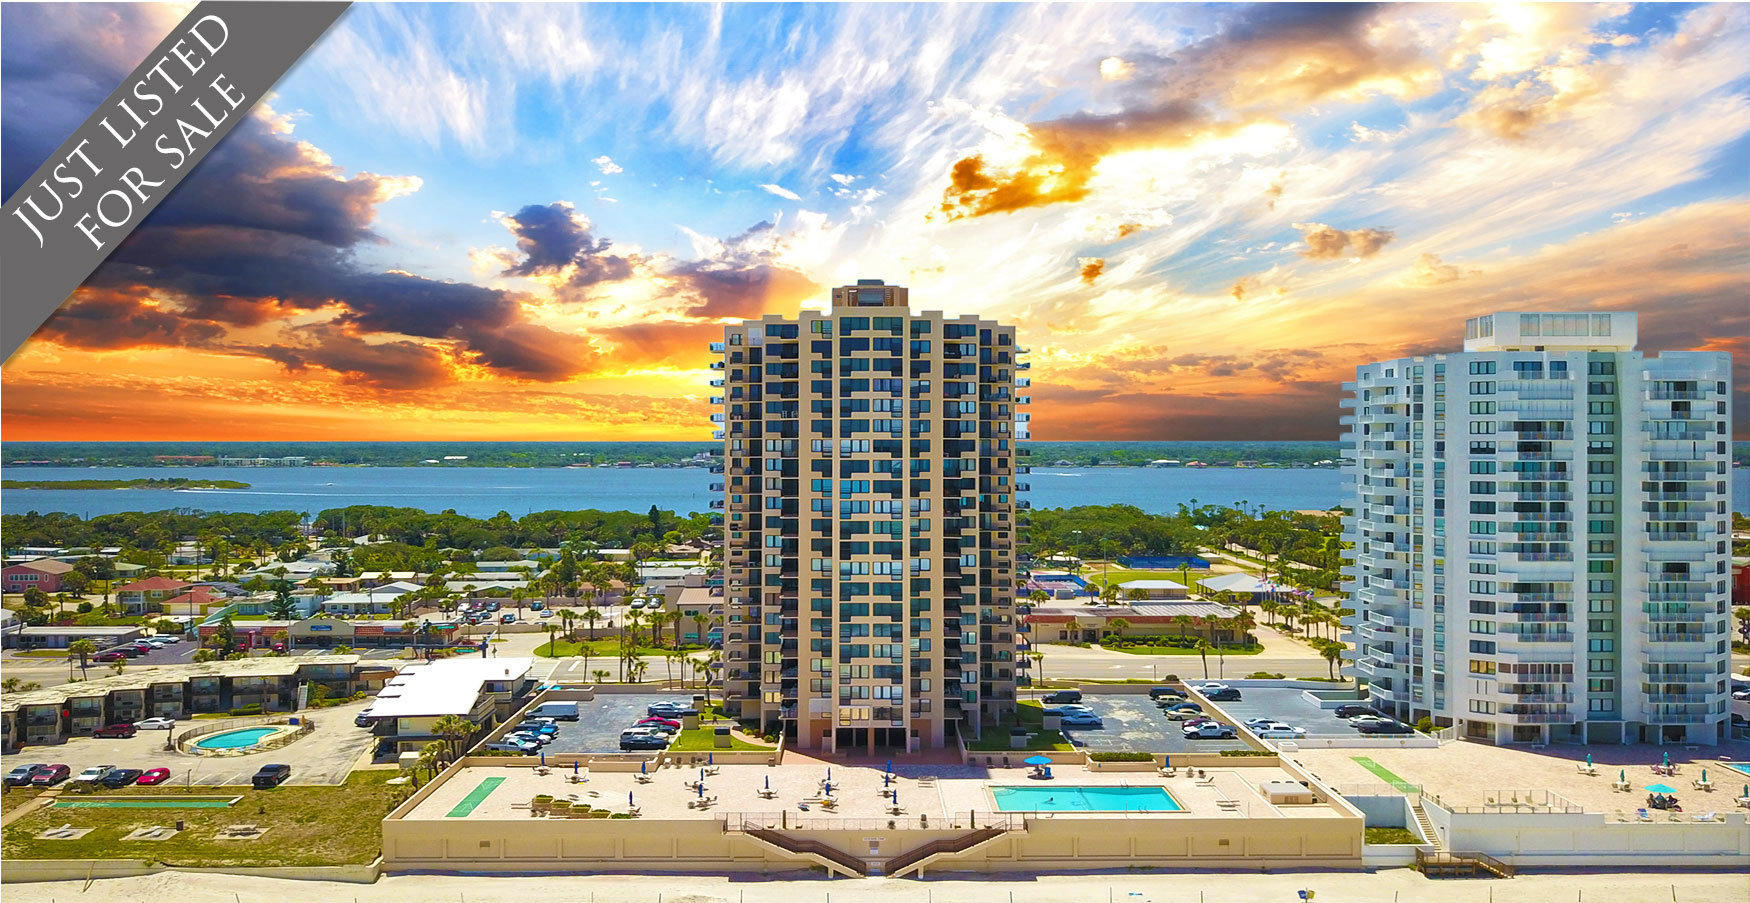 Oceans One Condos For Sale Oceanfront Real Estate at 3051 S Atlantic Ave Daytona Beach Shores, FL 